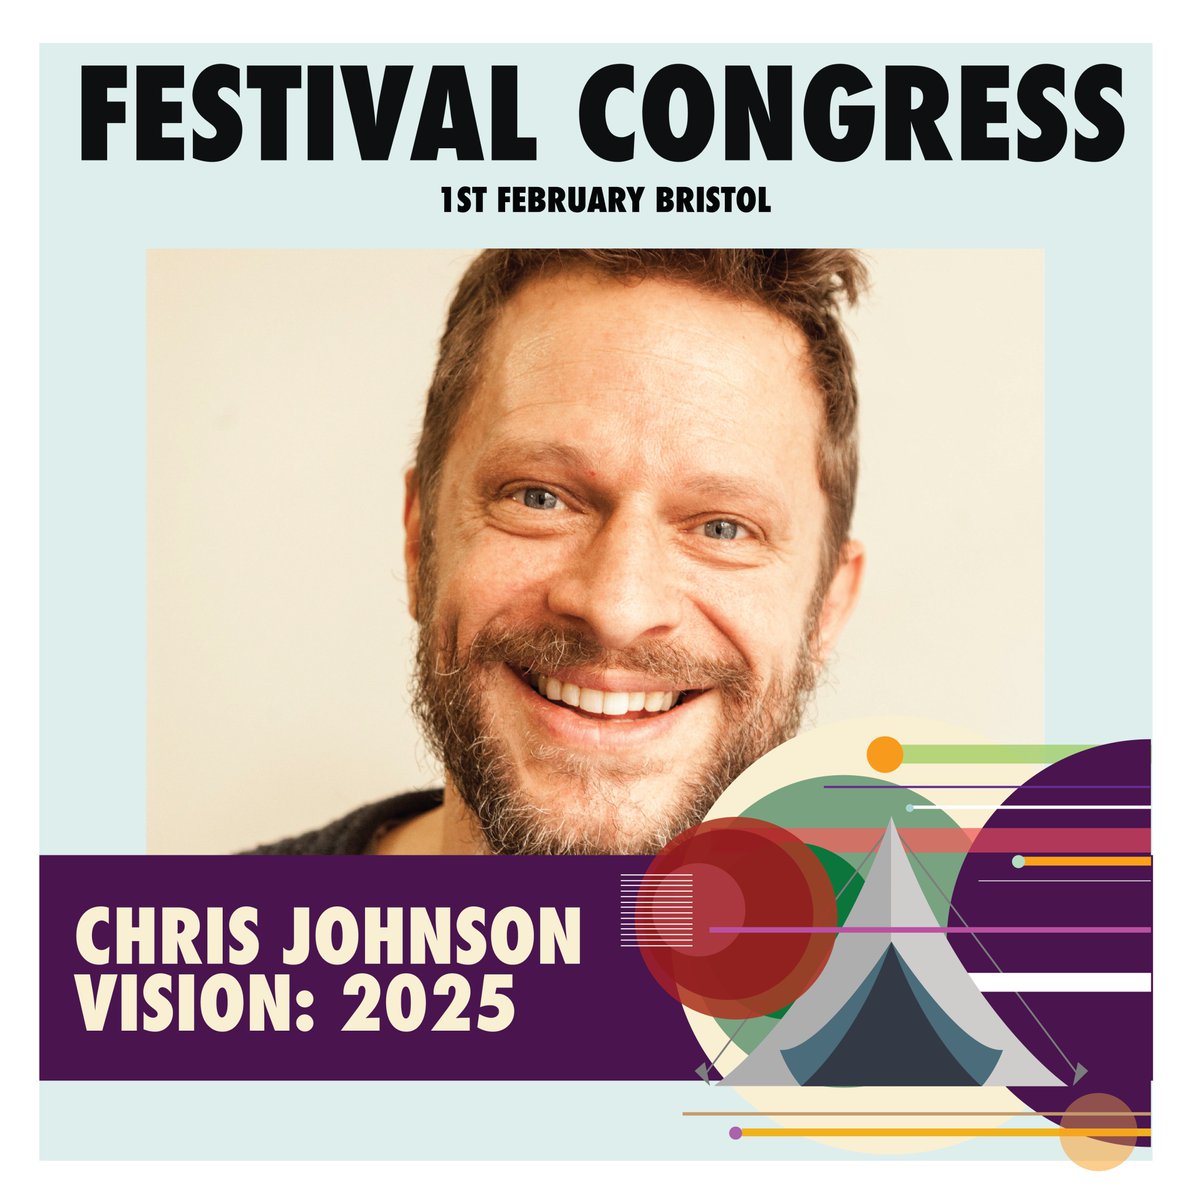 Exciting News! 🔊  Chris Johnson is joining us at #FestCongress24

Chris is co-founder and sustainability lead for @Shambalafest, Trustee of @ecolibriumearth and Chair/project Lead of @Eventvision2025

Grab tickets 🎫  so you can see Chris speak 🎙  
bit.ly/fc24tickets